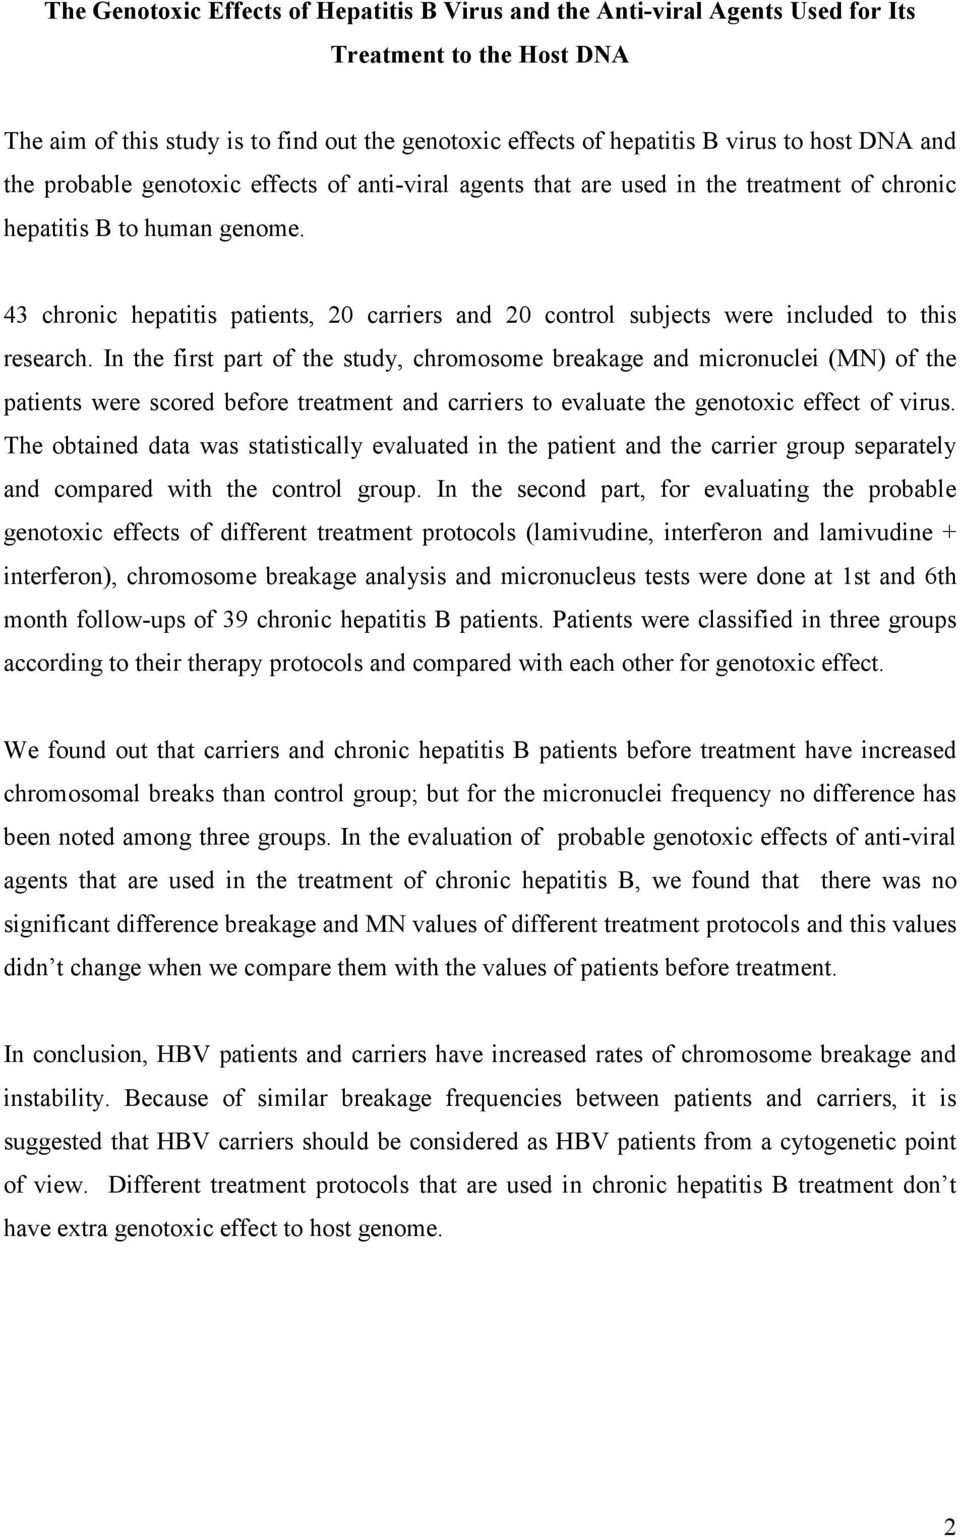 43 chronic hepatitis patients, 20 carriers and 20 control subjects were included to this research.